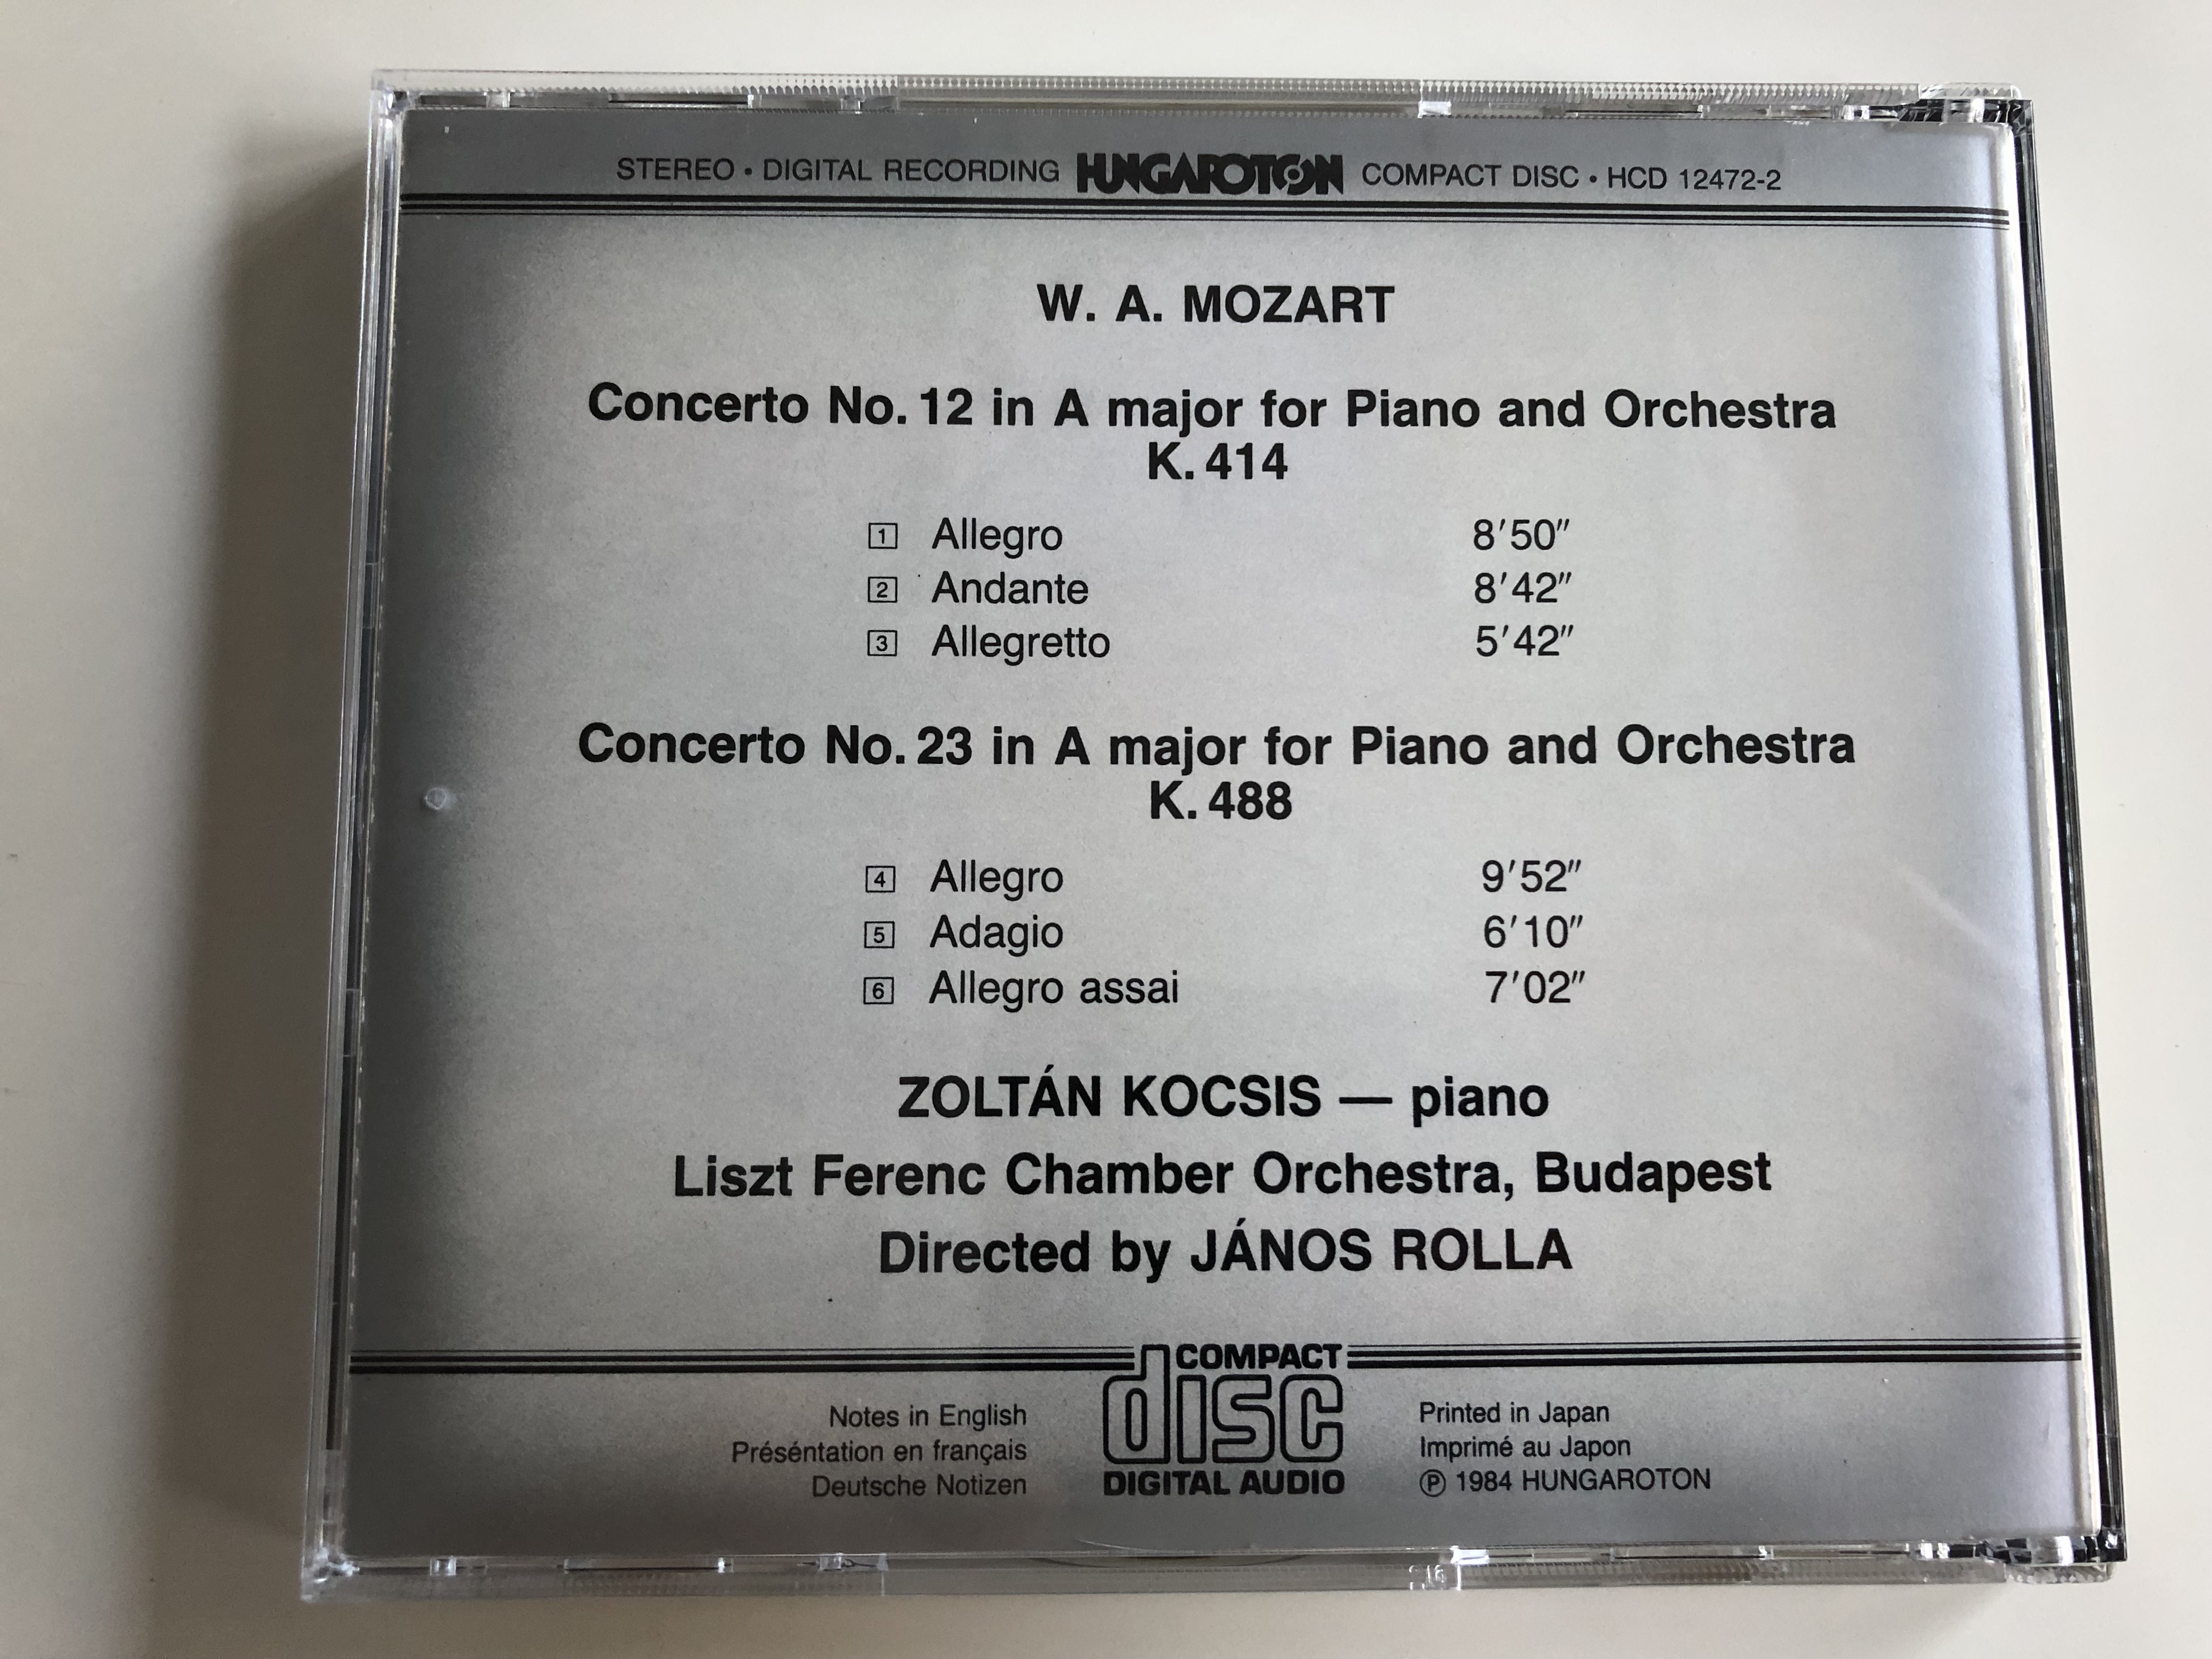 w.-a.-mozart-piano-concertos-in-a-major-k.414-488-zolt-n-kocsis-piano-liszt-ferenc-chamber-orchestra-conducted-by-j-nos-rolla-hungaroton-classic-audio-cd-1984-7-.jpg